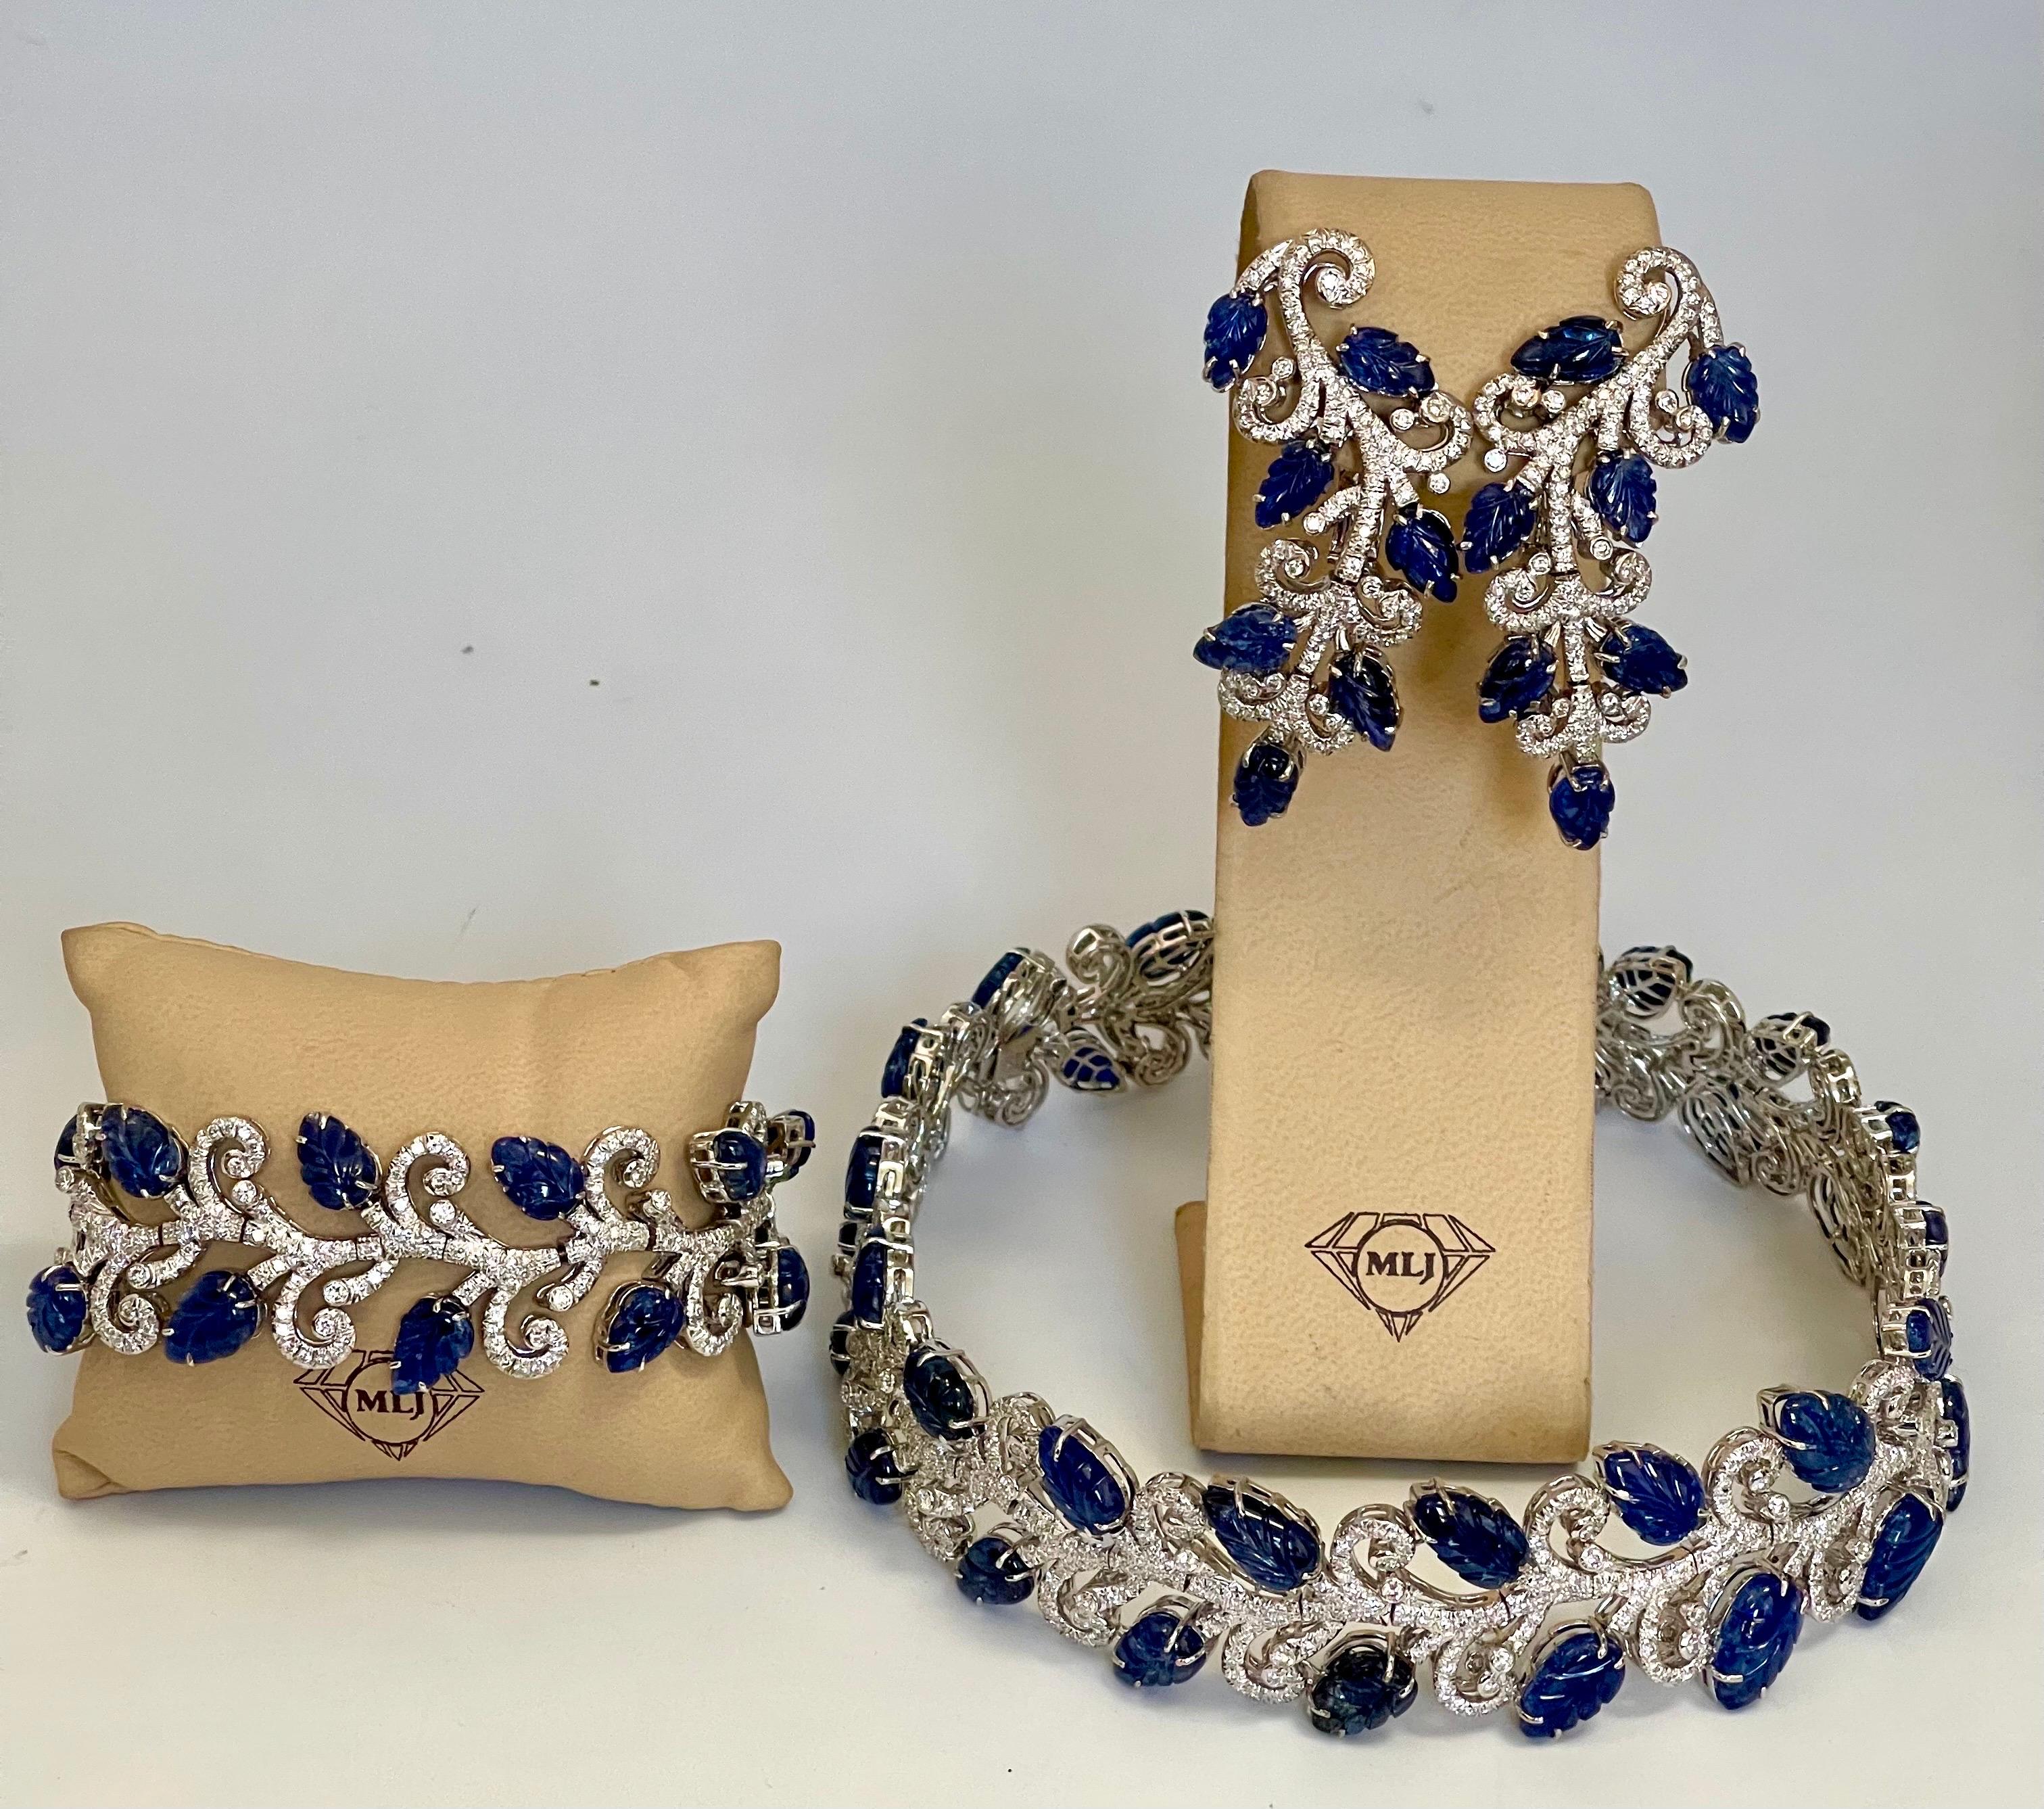 330 Ct Natural Carved Blue Sapphire & 65 Ct Diamond Necklace Bracelet & Earring For Sale 11